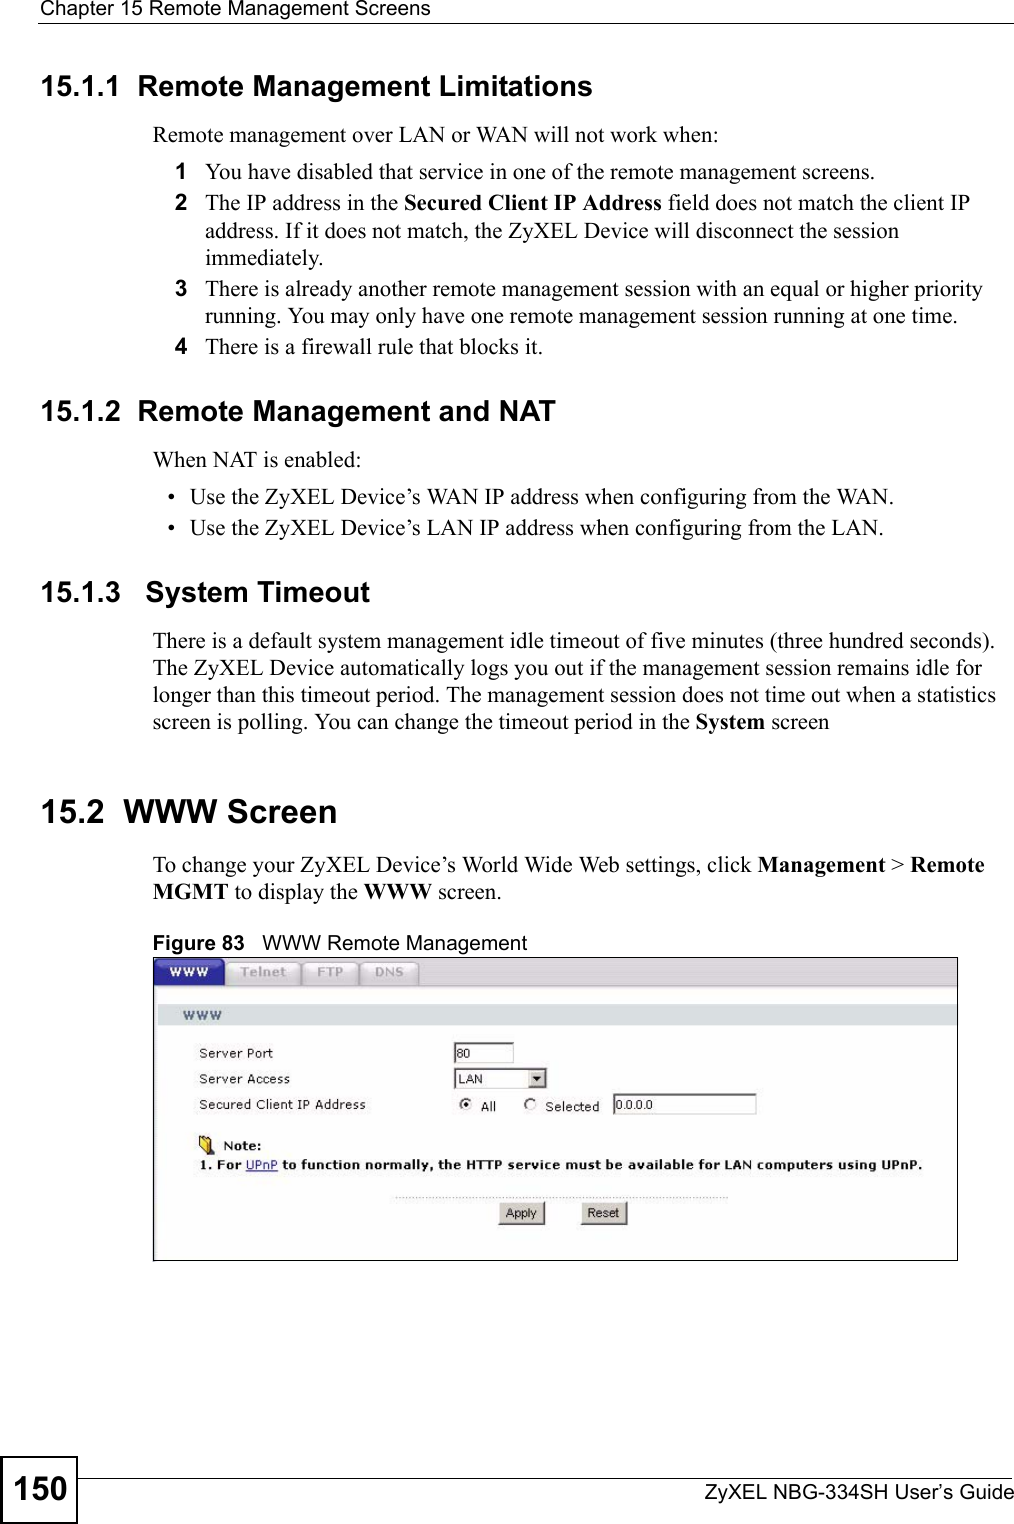 Chapter 15 Remote Management ScreensZyXEL NBG-334SH User’s Guide15015.1.1  Remote Management LimitationsRemote management over LAN or WAN will not work when:1You have disabled that service in one of the remote management screens.2The IP address in the Secured Client IP Address field does not match the client IP address. If it does not match, the ZyXEL Device will disconnect the session immediately.3There is already another remote management session with an equal or higher priority running. You may only have one remote management session running at one time.4There is a firewall rule that blocks it.15.1.2  Remote Management and NATWhen NAT is enabled:• Use the ZyXEL Device’s WAN IP address when configuring from the WAN. • Use the ZyXEL Device’s LAN IP address when configuring from the LAN.15.1.3   System TimeoutThere is a default system management idle timeout of five minutes (three hundred seconds). The ZyXEL Device automatically logs you out if the management session remains idle for longer than this timeout period. The management session does not time out when a statistics screen is polling. You can change the timeout period in the System screen15.2  WWW Screen    To change your ZyXEL Device’s World Wide Web settings, click Management &gt; Remote MGMT to display the WWW screen.Figure 83   WWW Remote Management